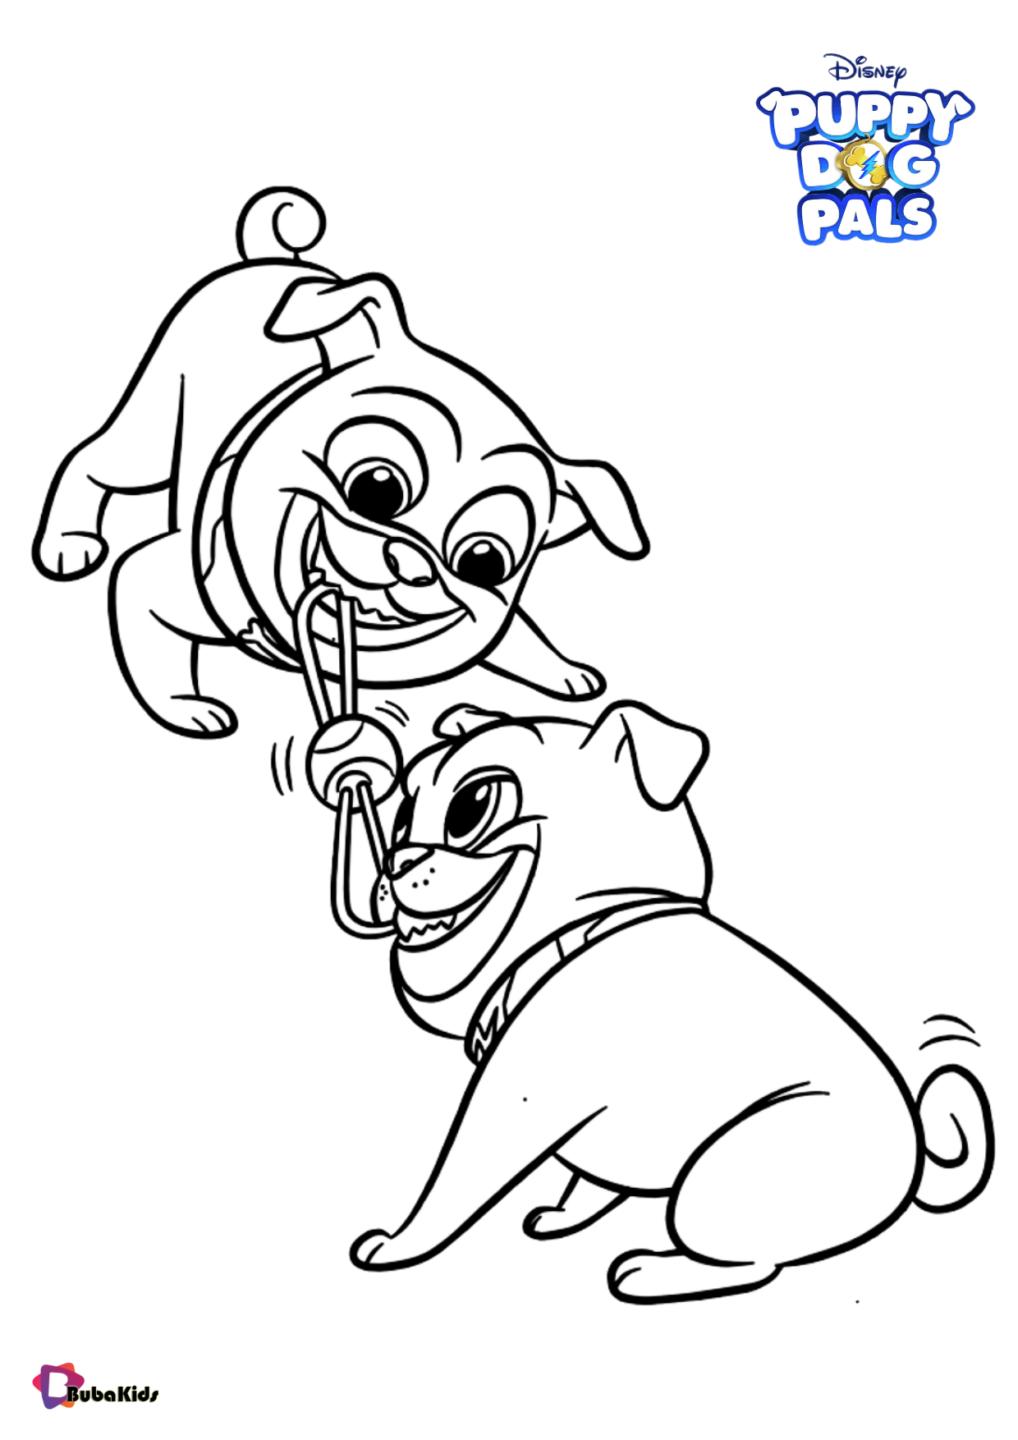 bingo and rolly coloring sheet Disney Puppy Dog Pals